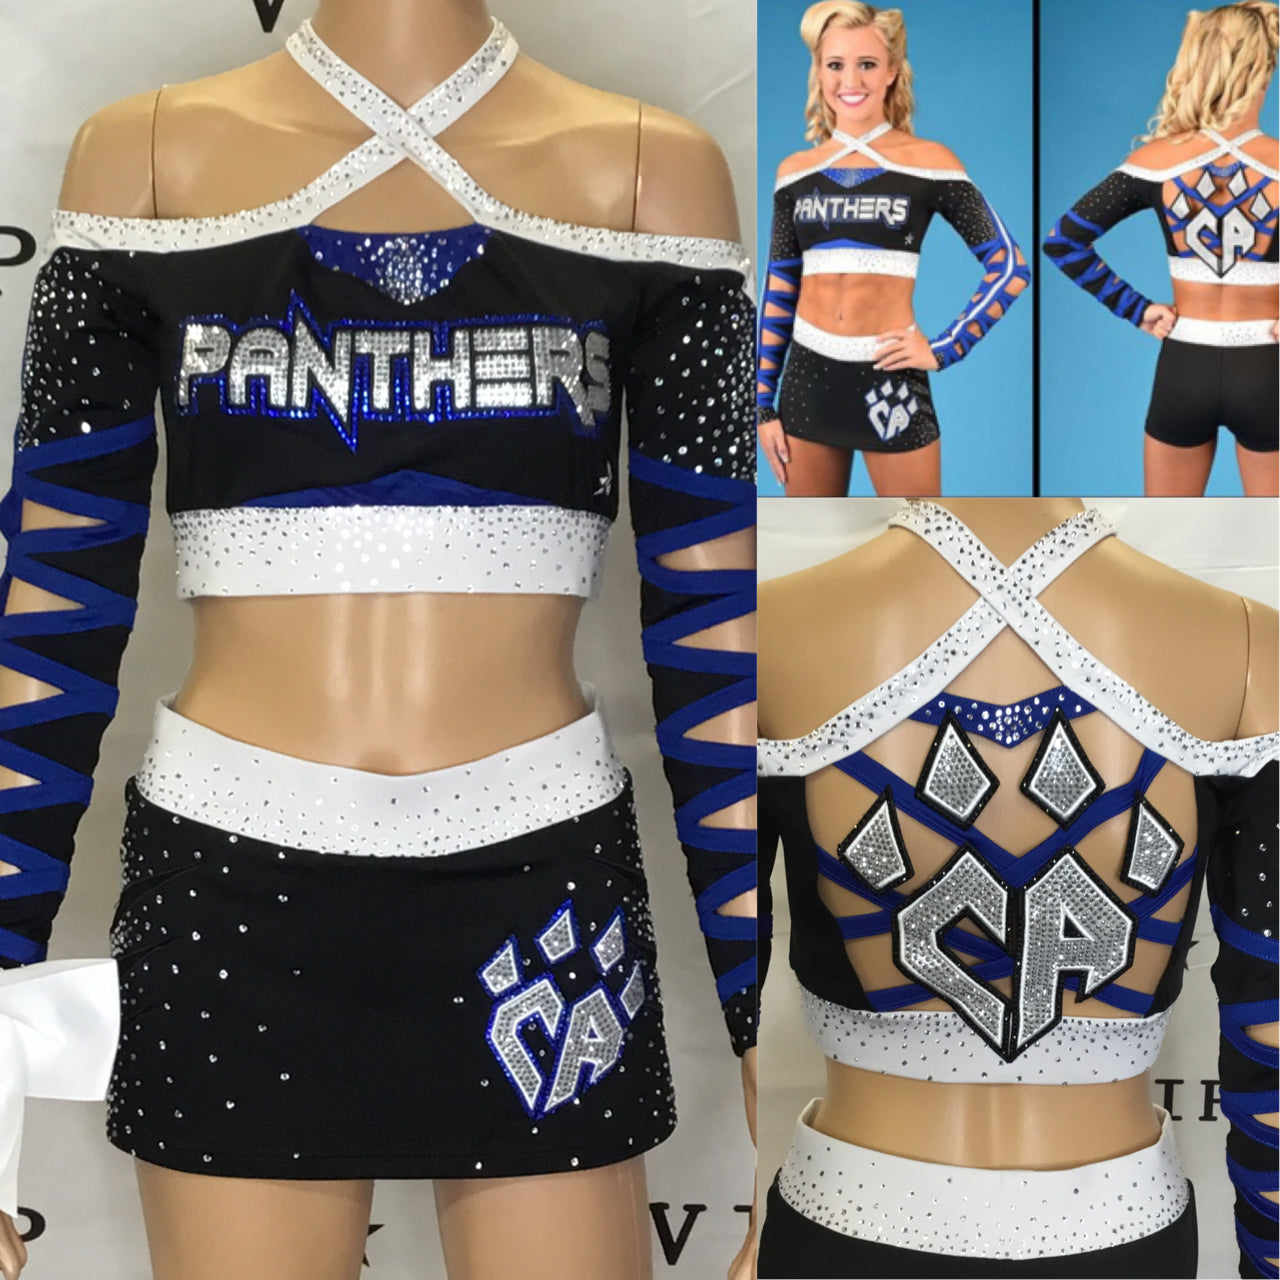 A better view of CHEER ATHLETICS PANTHERS new uniforms by @RebelAthletic❗️Debuted  for #MAJORS!”